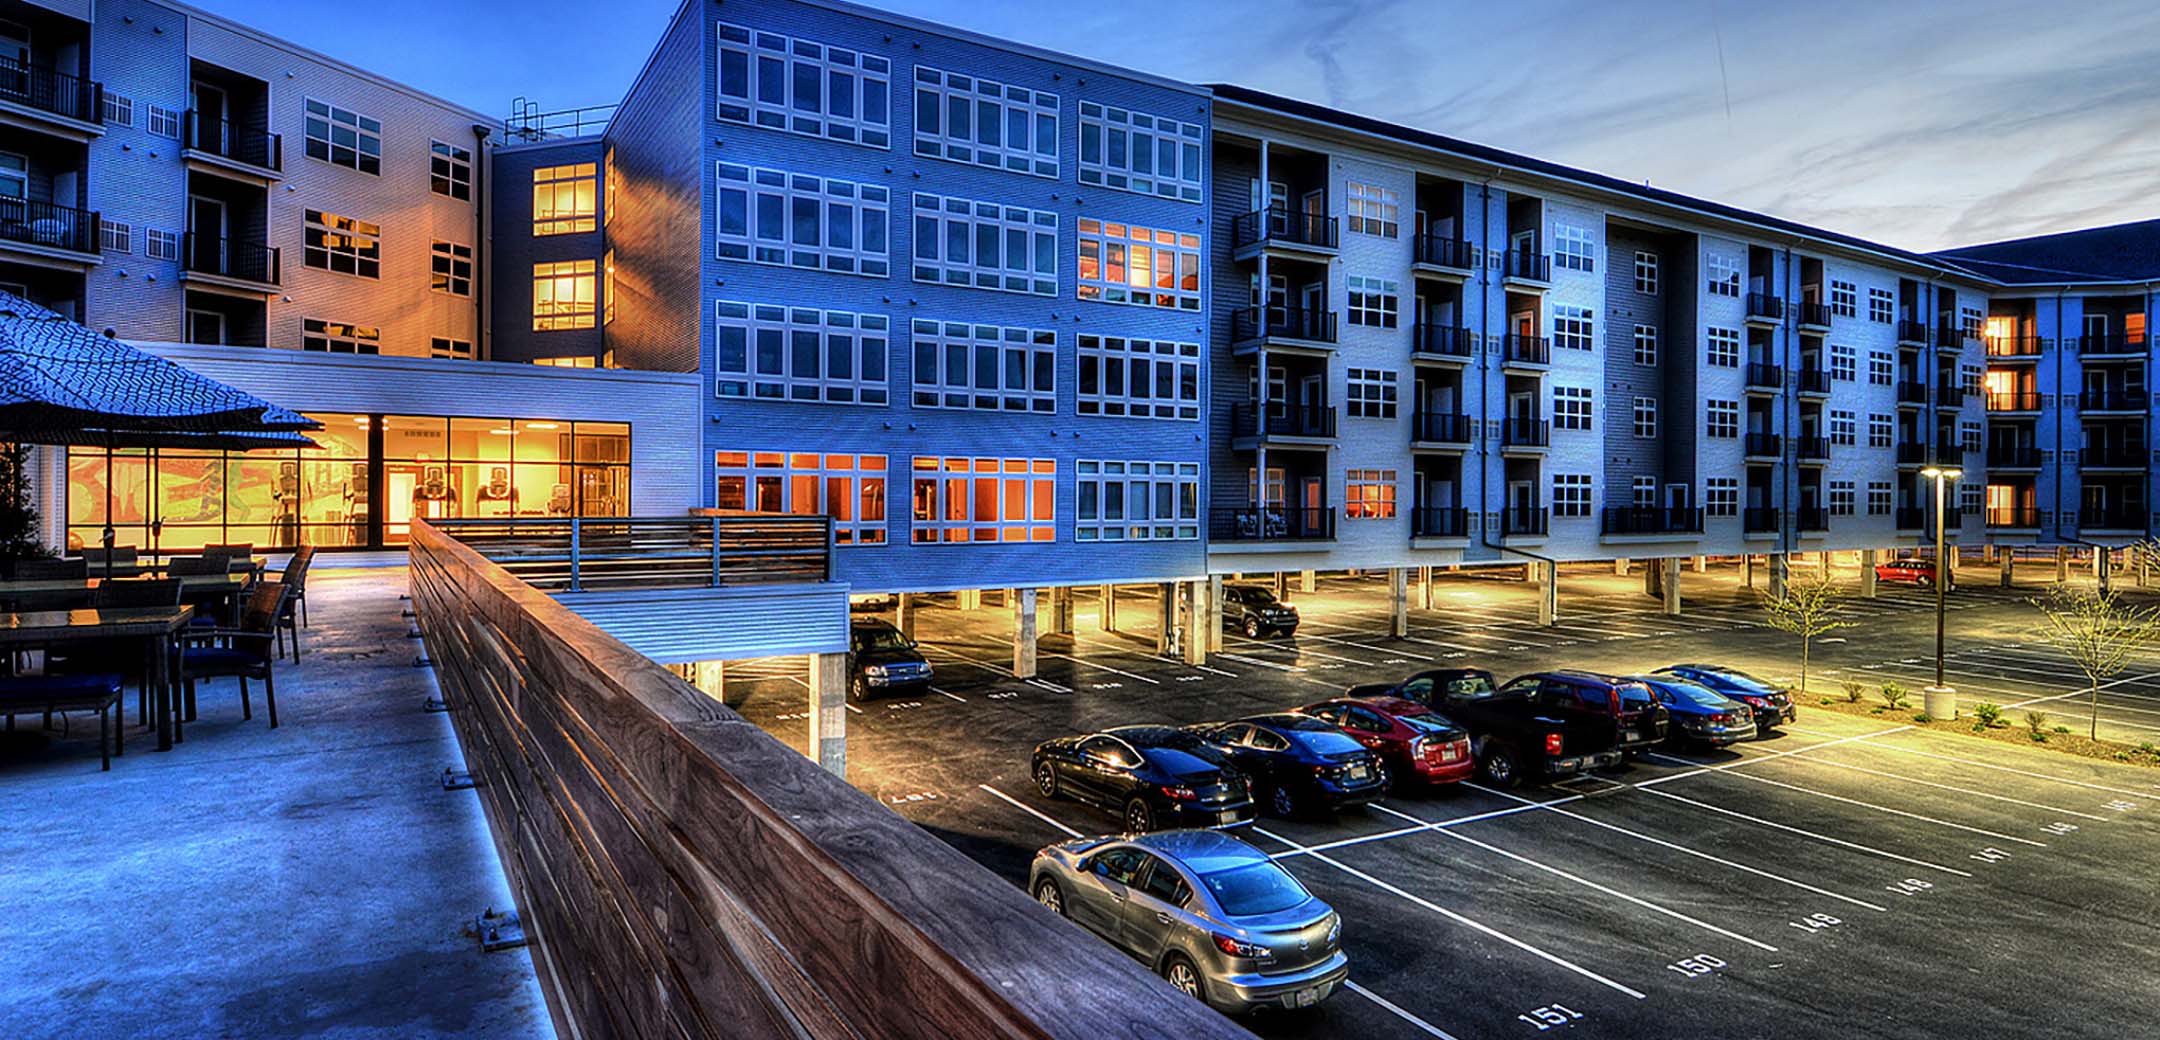 An angled view of the Phoenix Village building from the second floor balcony courtyard showcasing the floor level private parking lot.